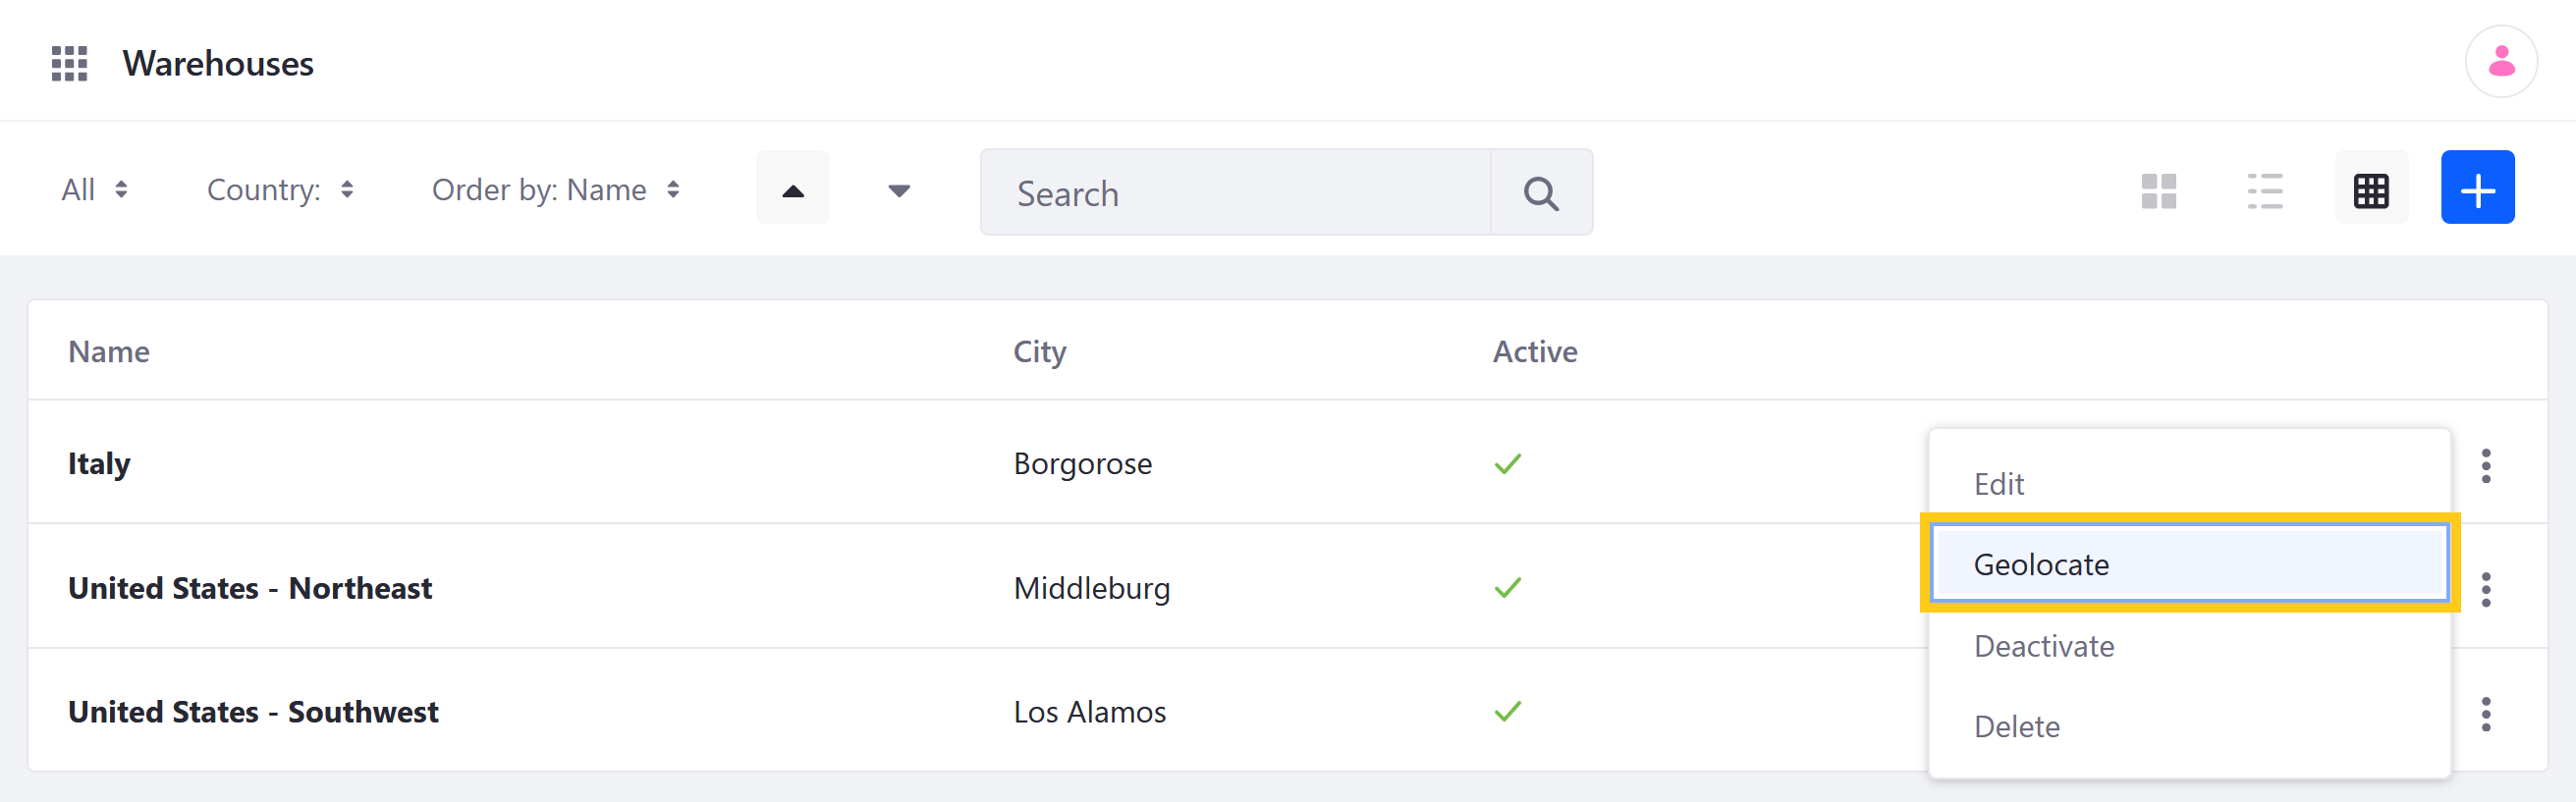 Click the Actions button for the desired warehouse and select Geolocate.